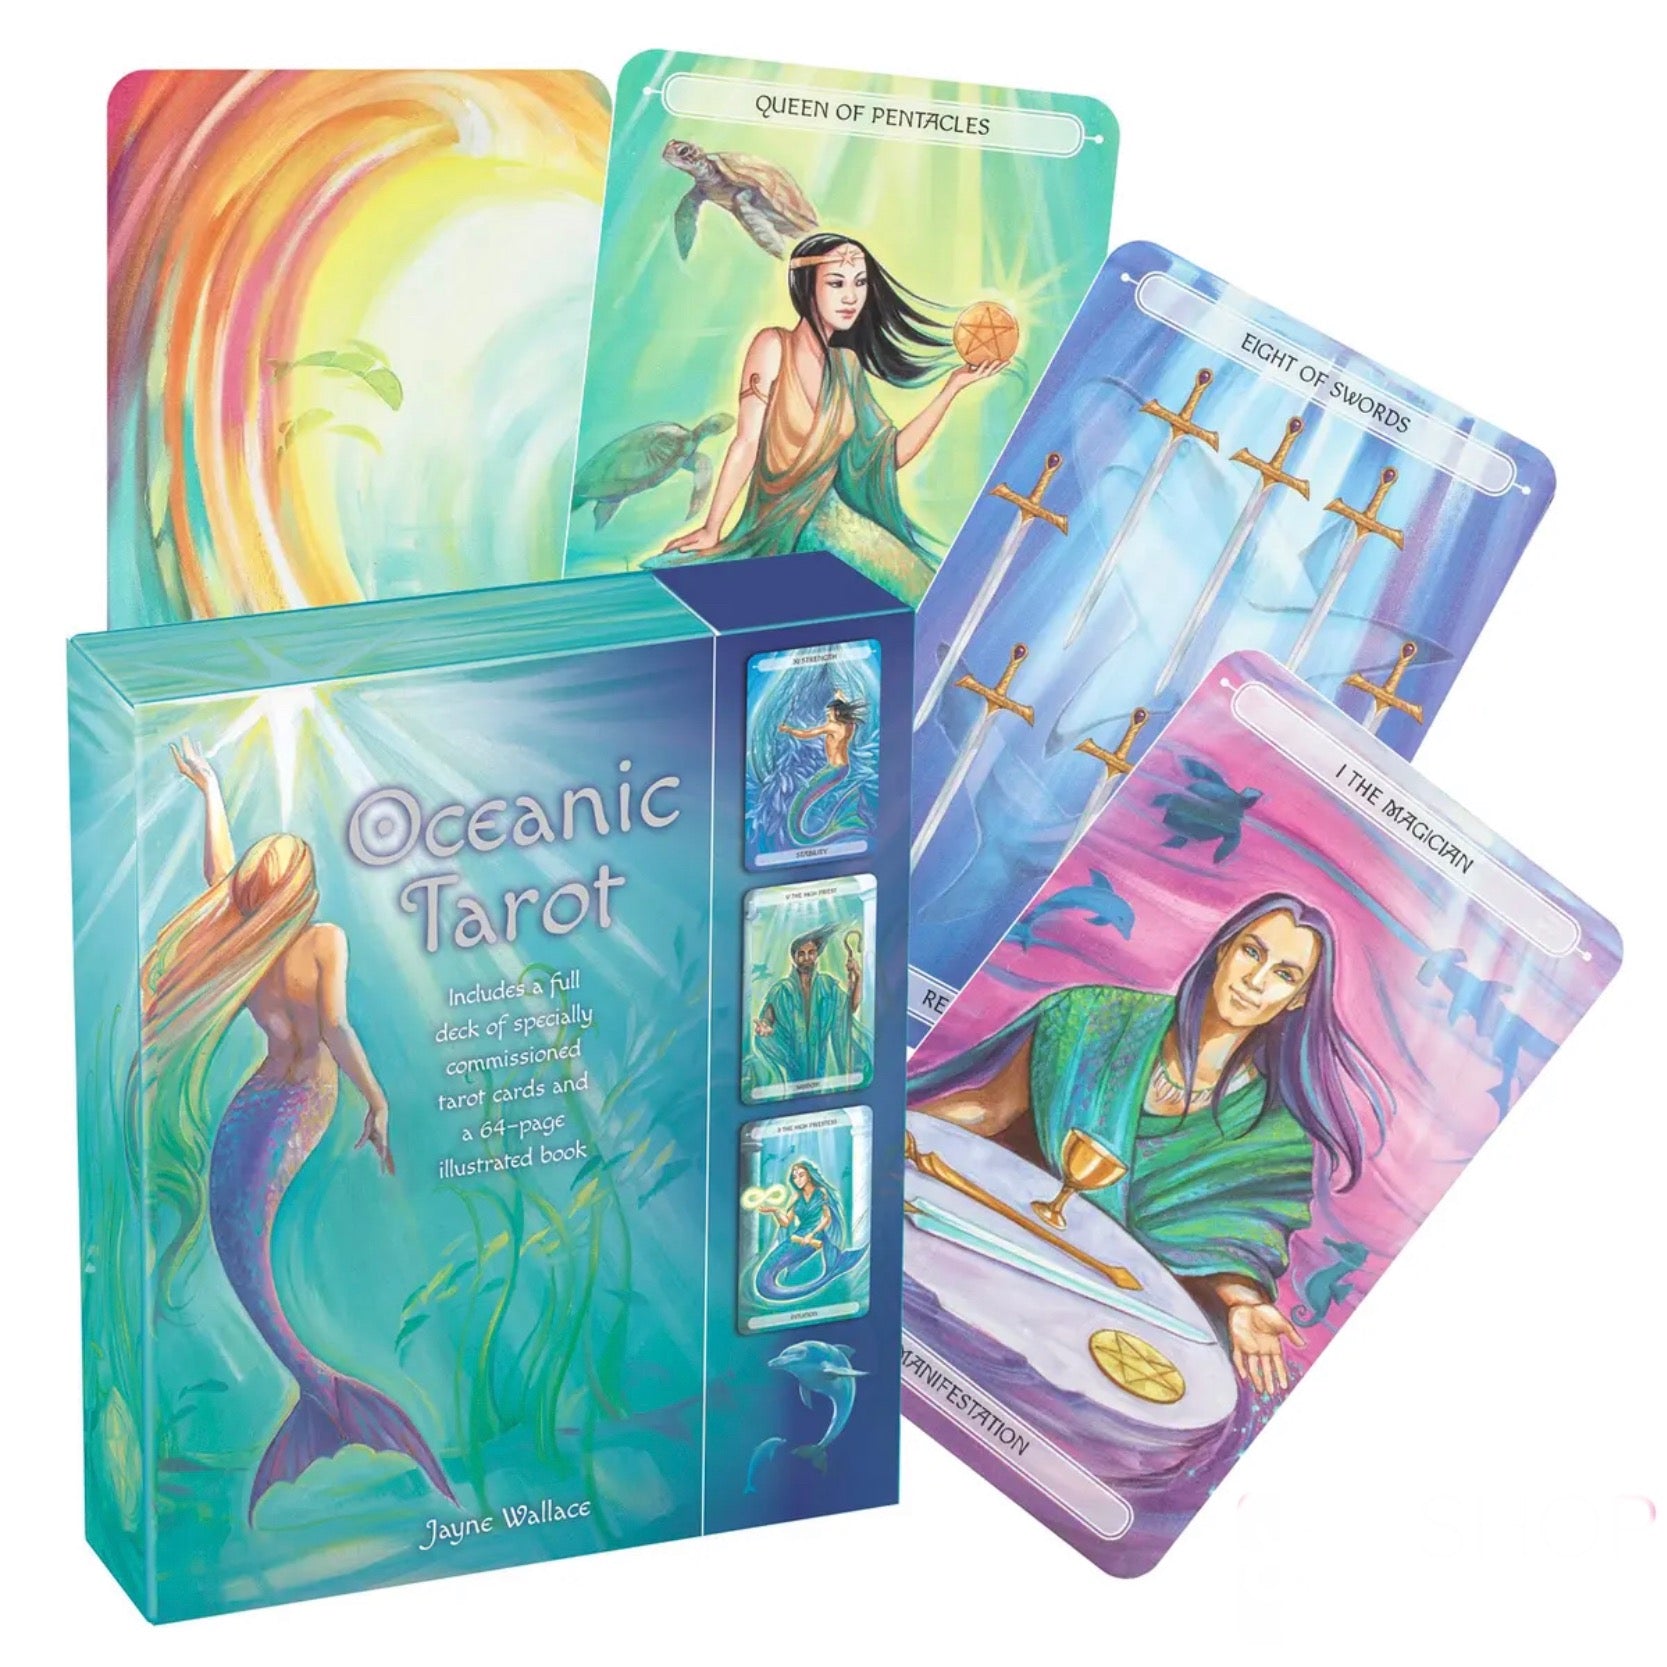 OCEANIC TAROT BY JAYNE WALLACE - Psychic Sisters